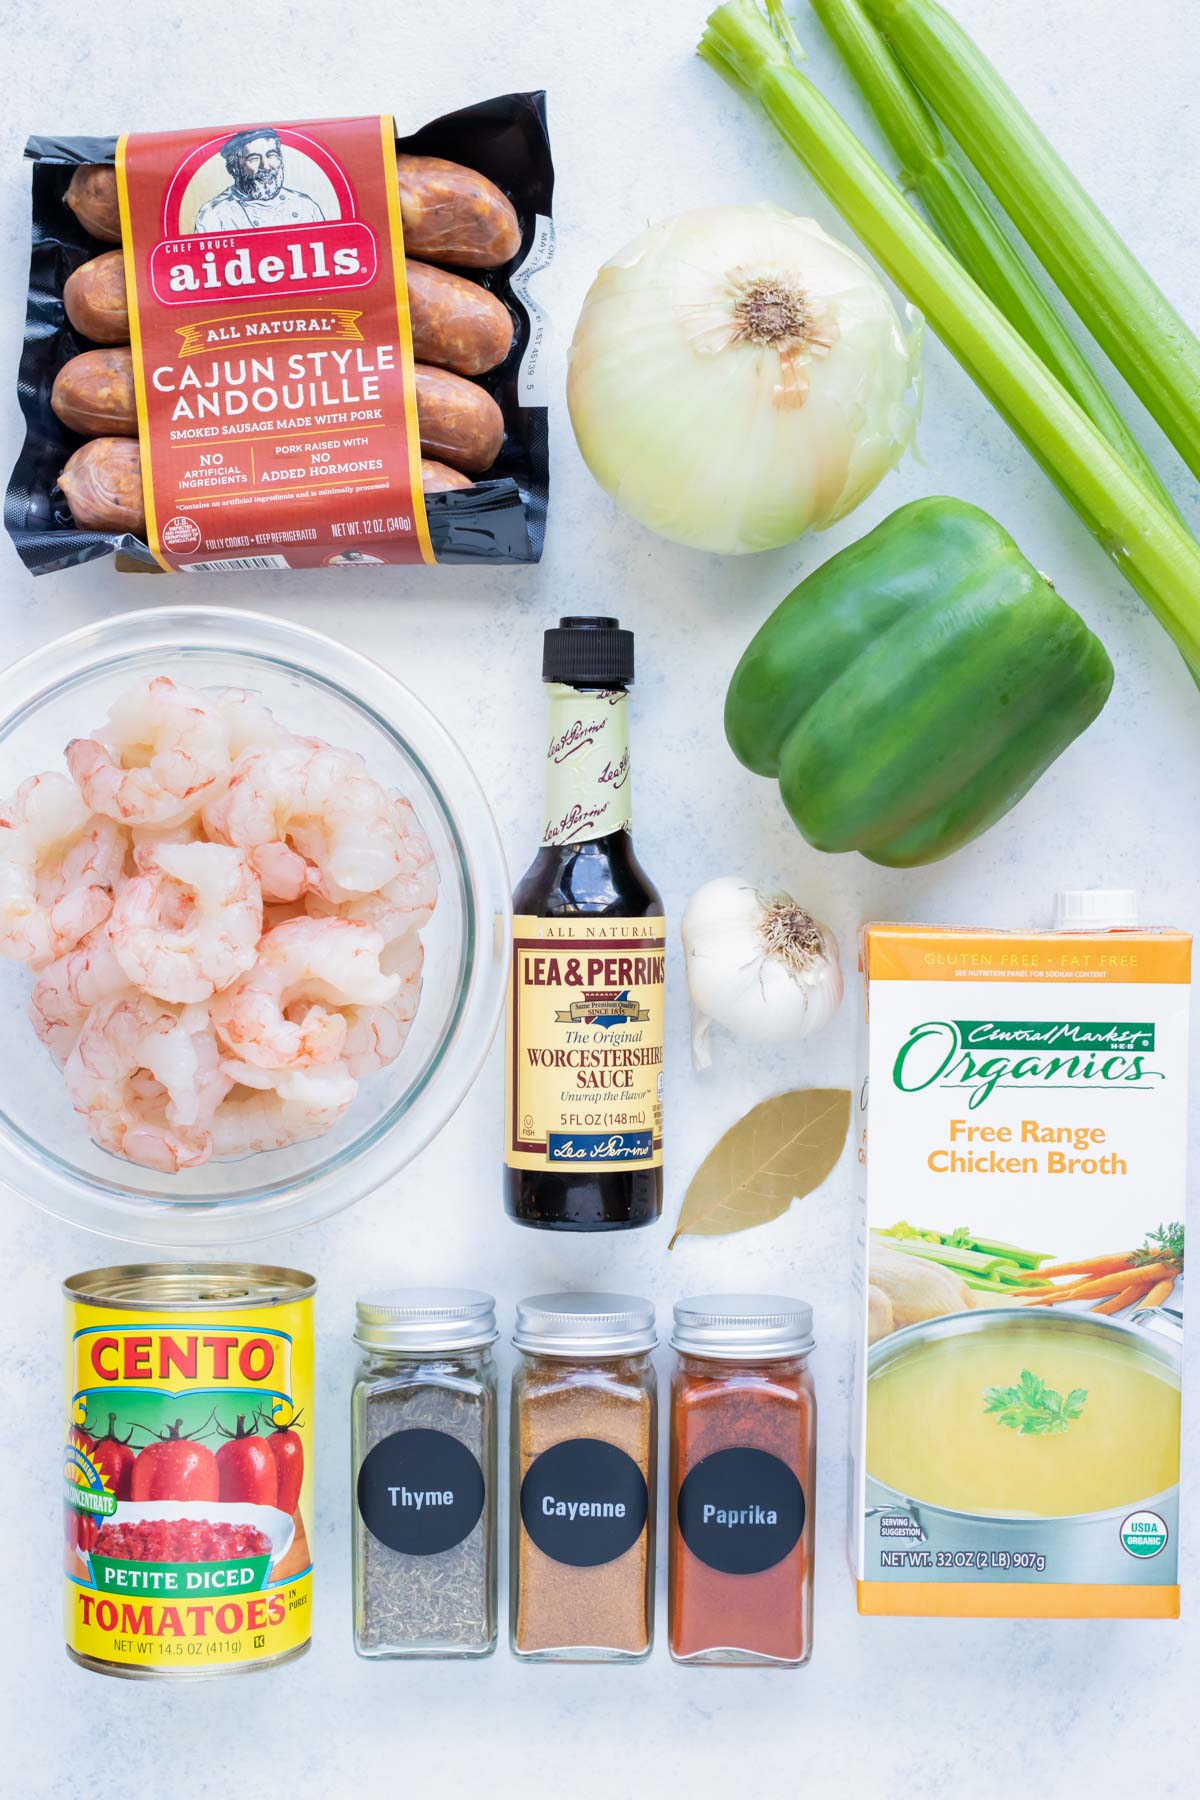 Shrimp, sausage, tomatoes, cajun spices, celery, onion, peppers, roux, and Worcestershire Sauce are the ingredients needed.